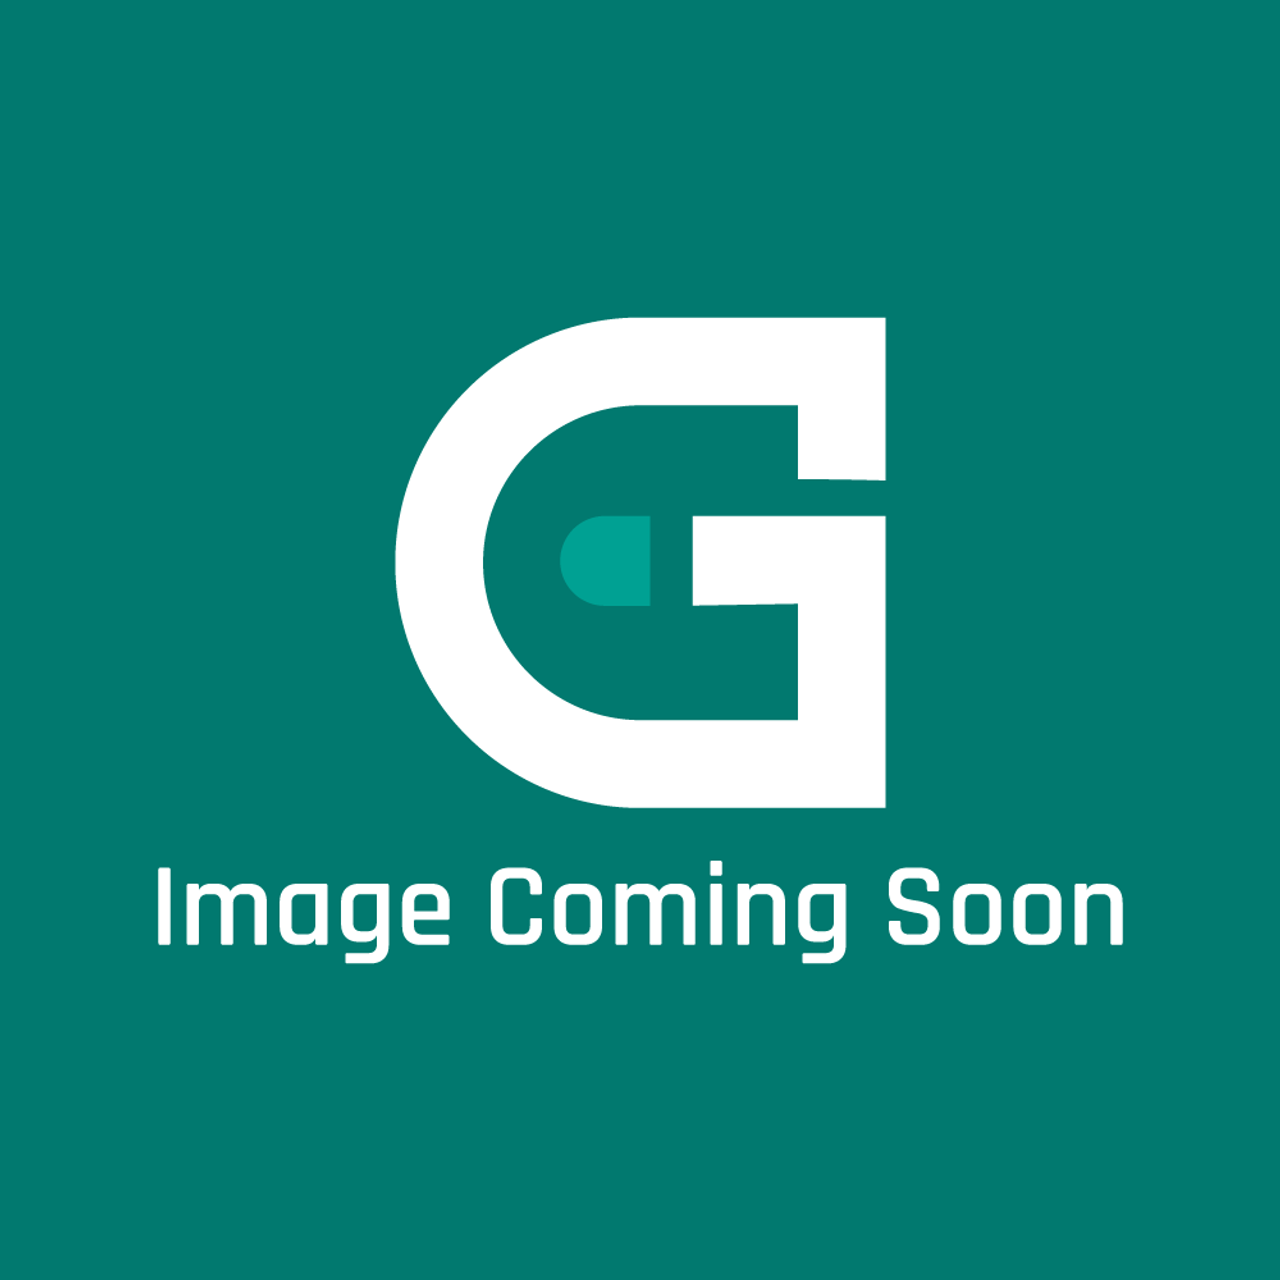 Groen 152048 - Double Stack Outter Pane L Assy - Image Coming Soon!